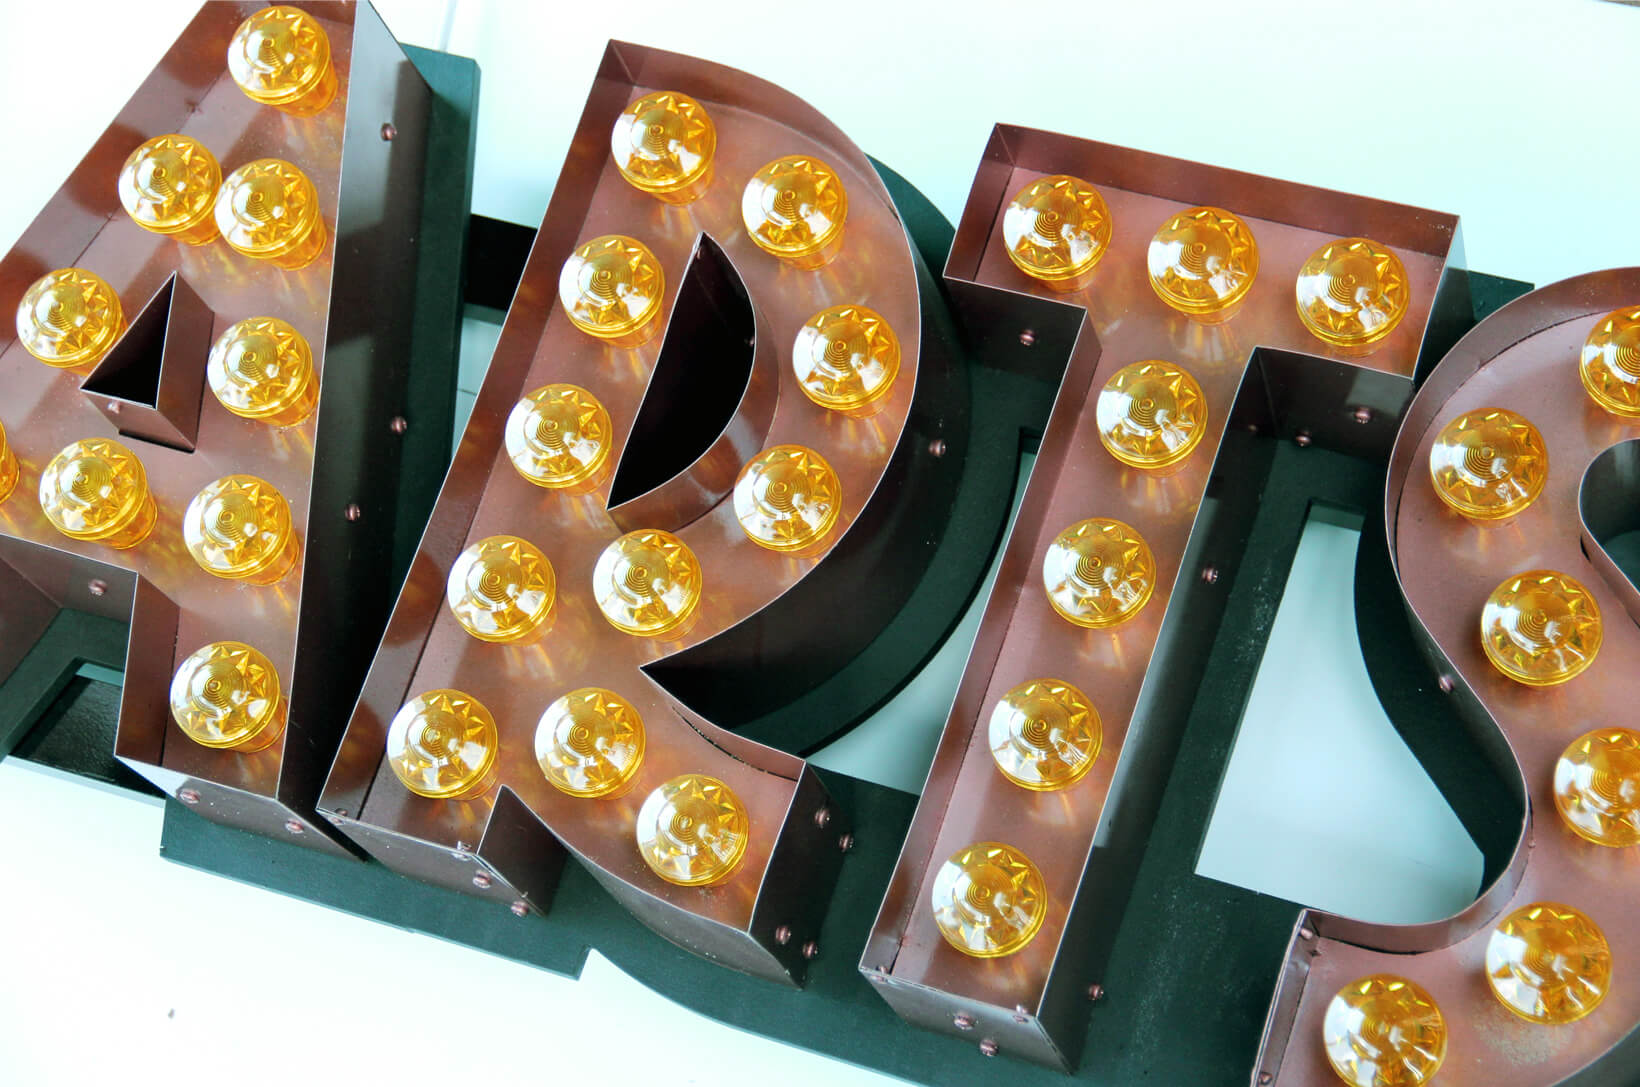 letters with bulbs - Musical arts inscription composed of spatial luminous letters